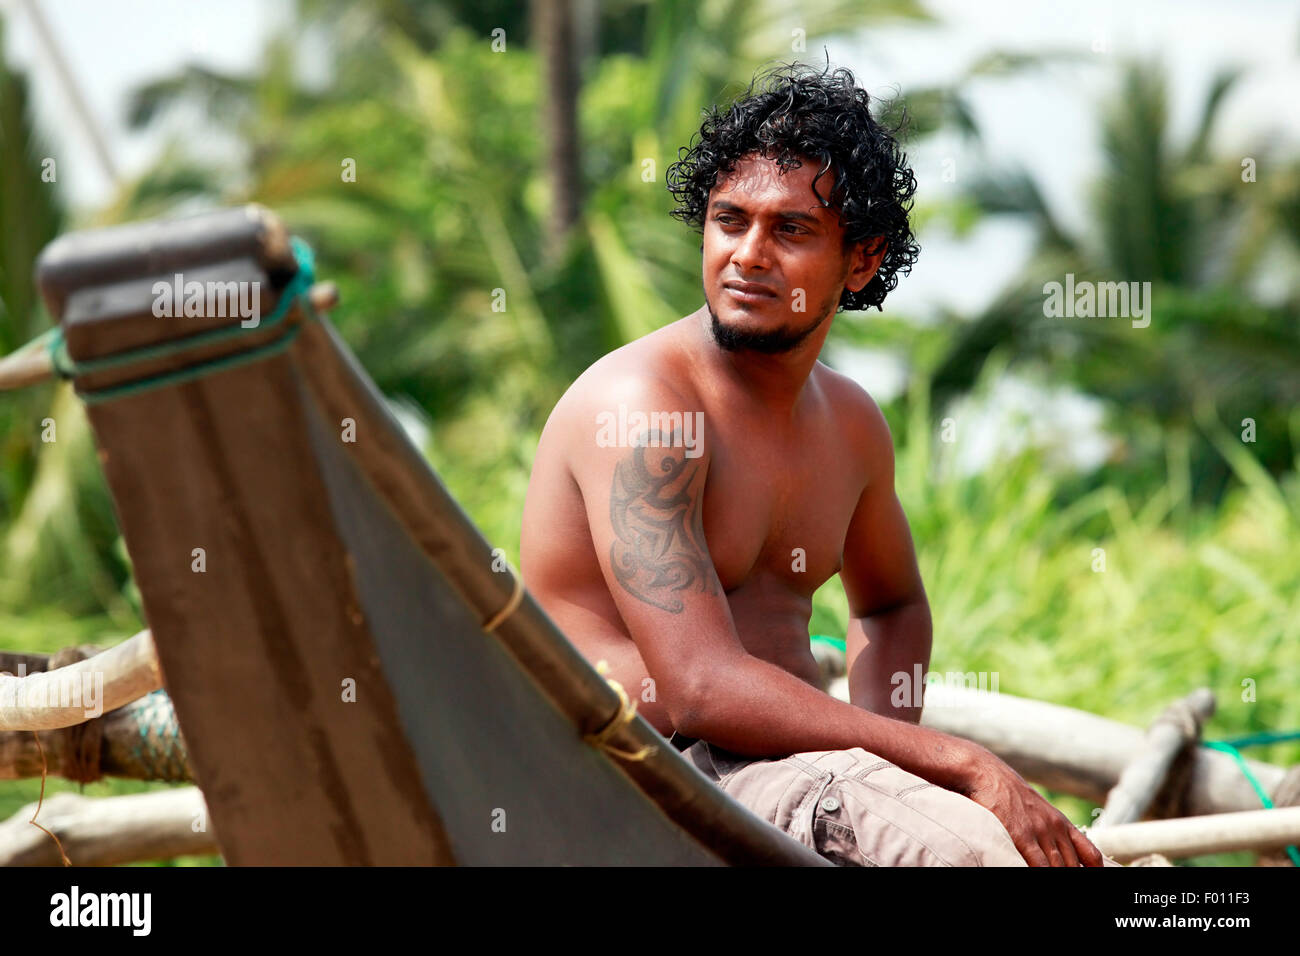 The young man sitting by a boat. Sri Lanka Stock Photo